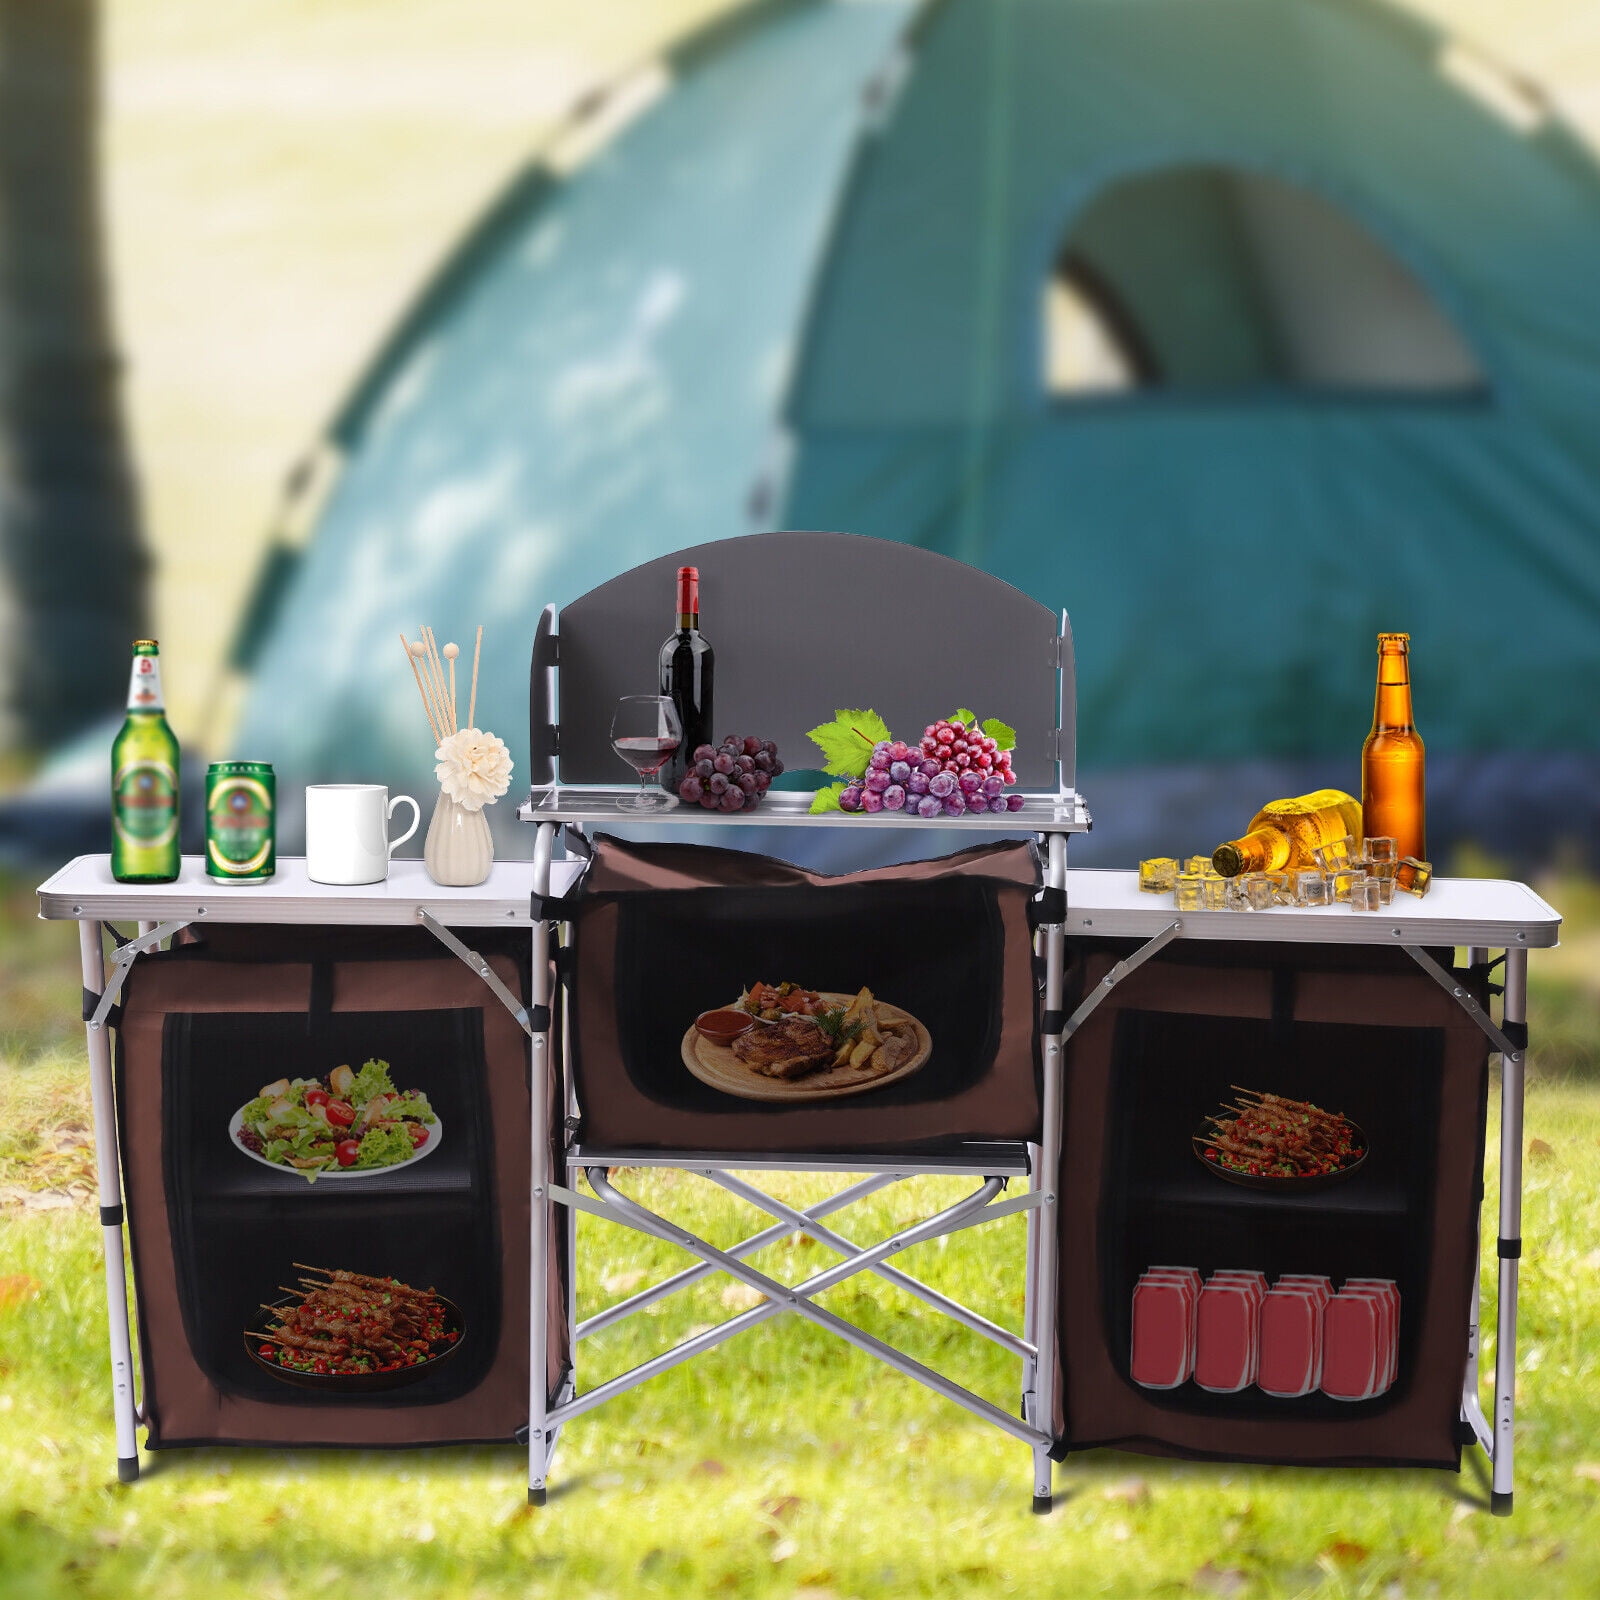 BENTISM Camping Kitchen Table Folding Portable Cook Table 1 Cupboard &  Windscreen 